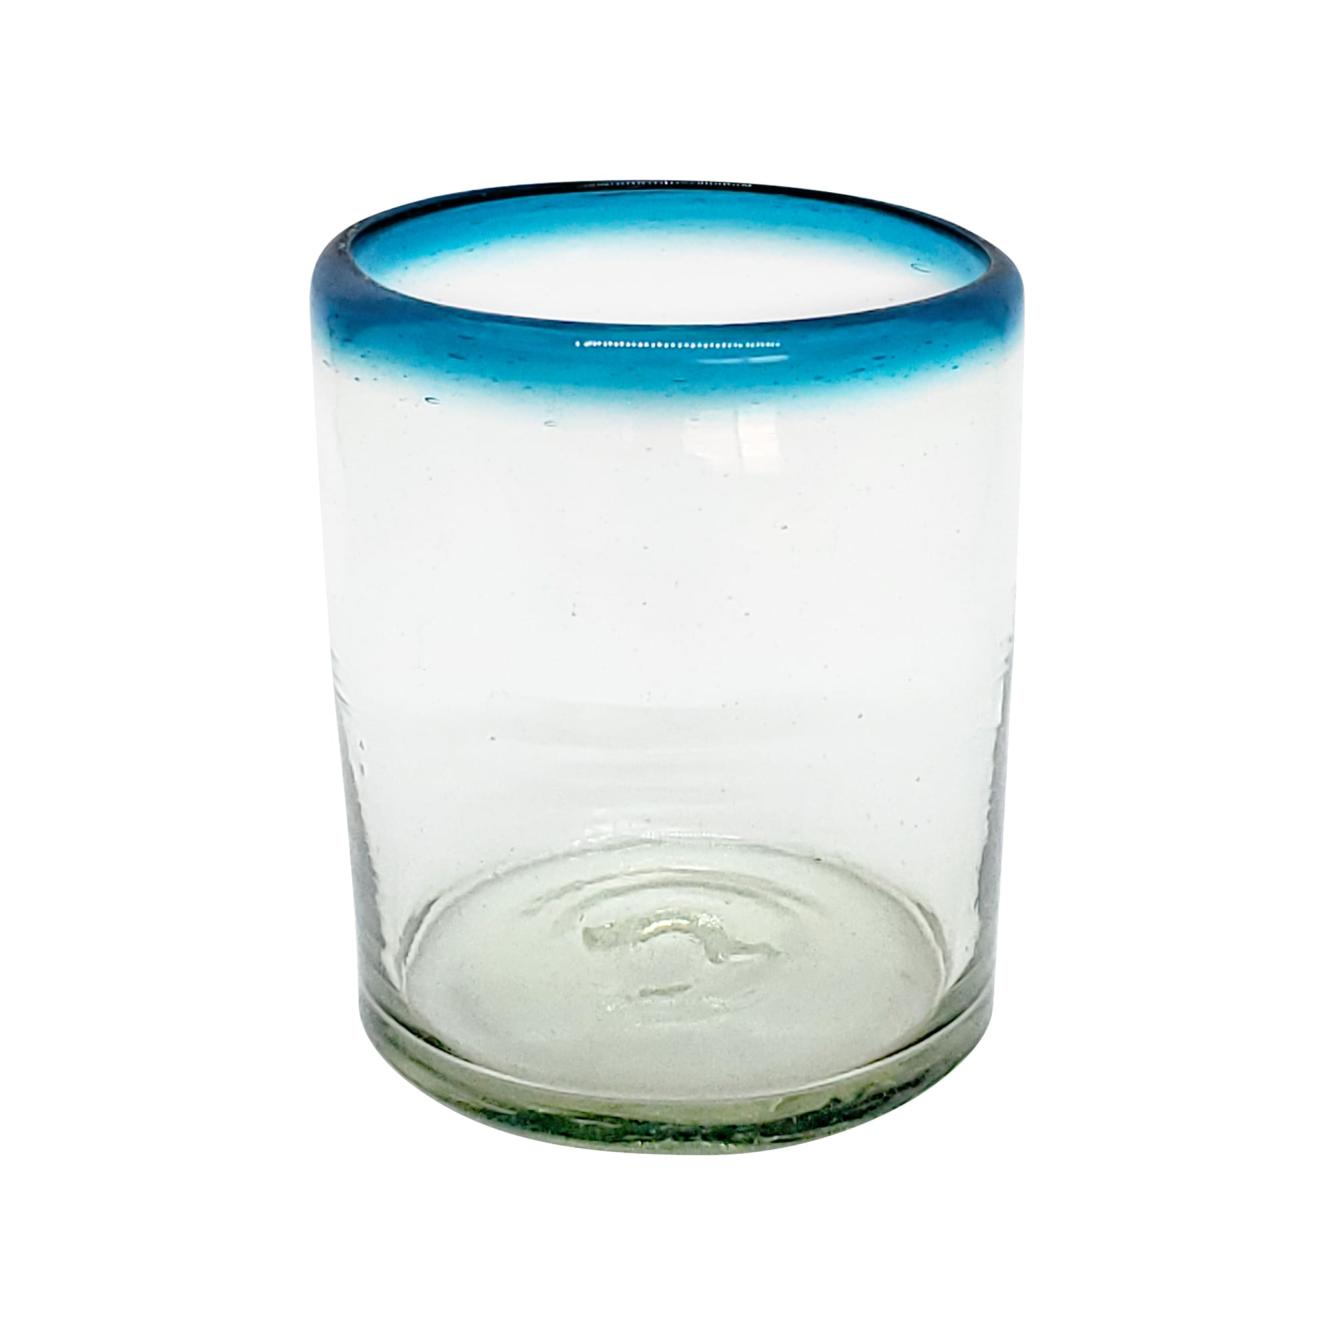 New Items / Aqua Blue Rim 10 oz Tumblers (set of 6) / These tumblers are a great complement for your pitcher and drinking glasses set.<br>1-Year Product Replacement in case of defects (glasses broken in dishwasher is considered a defect).